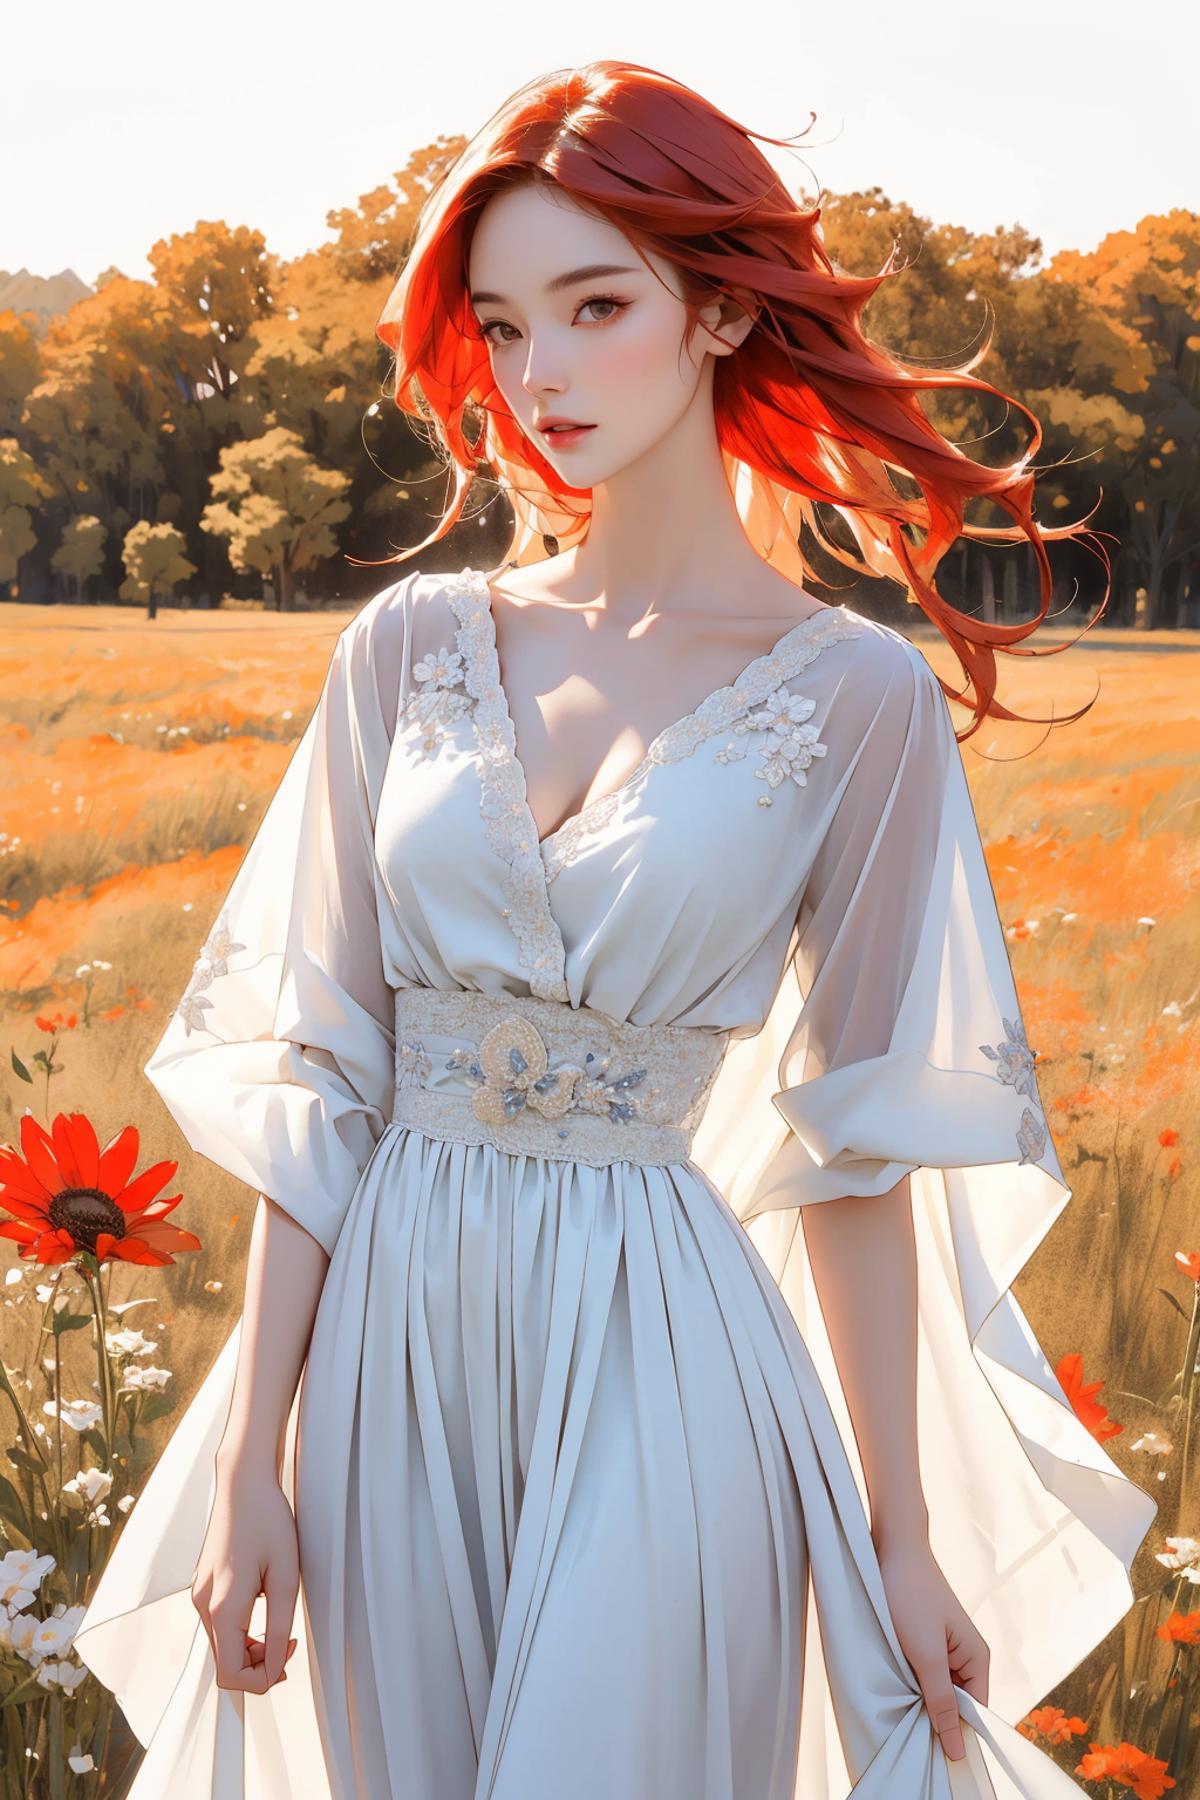 A red-haired anime girl with a white dress walking through a field of flowers.